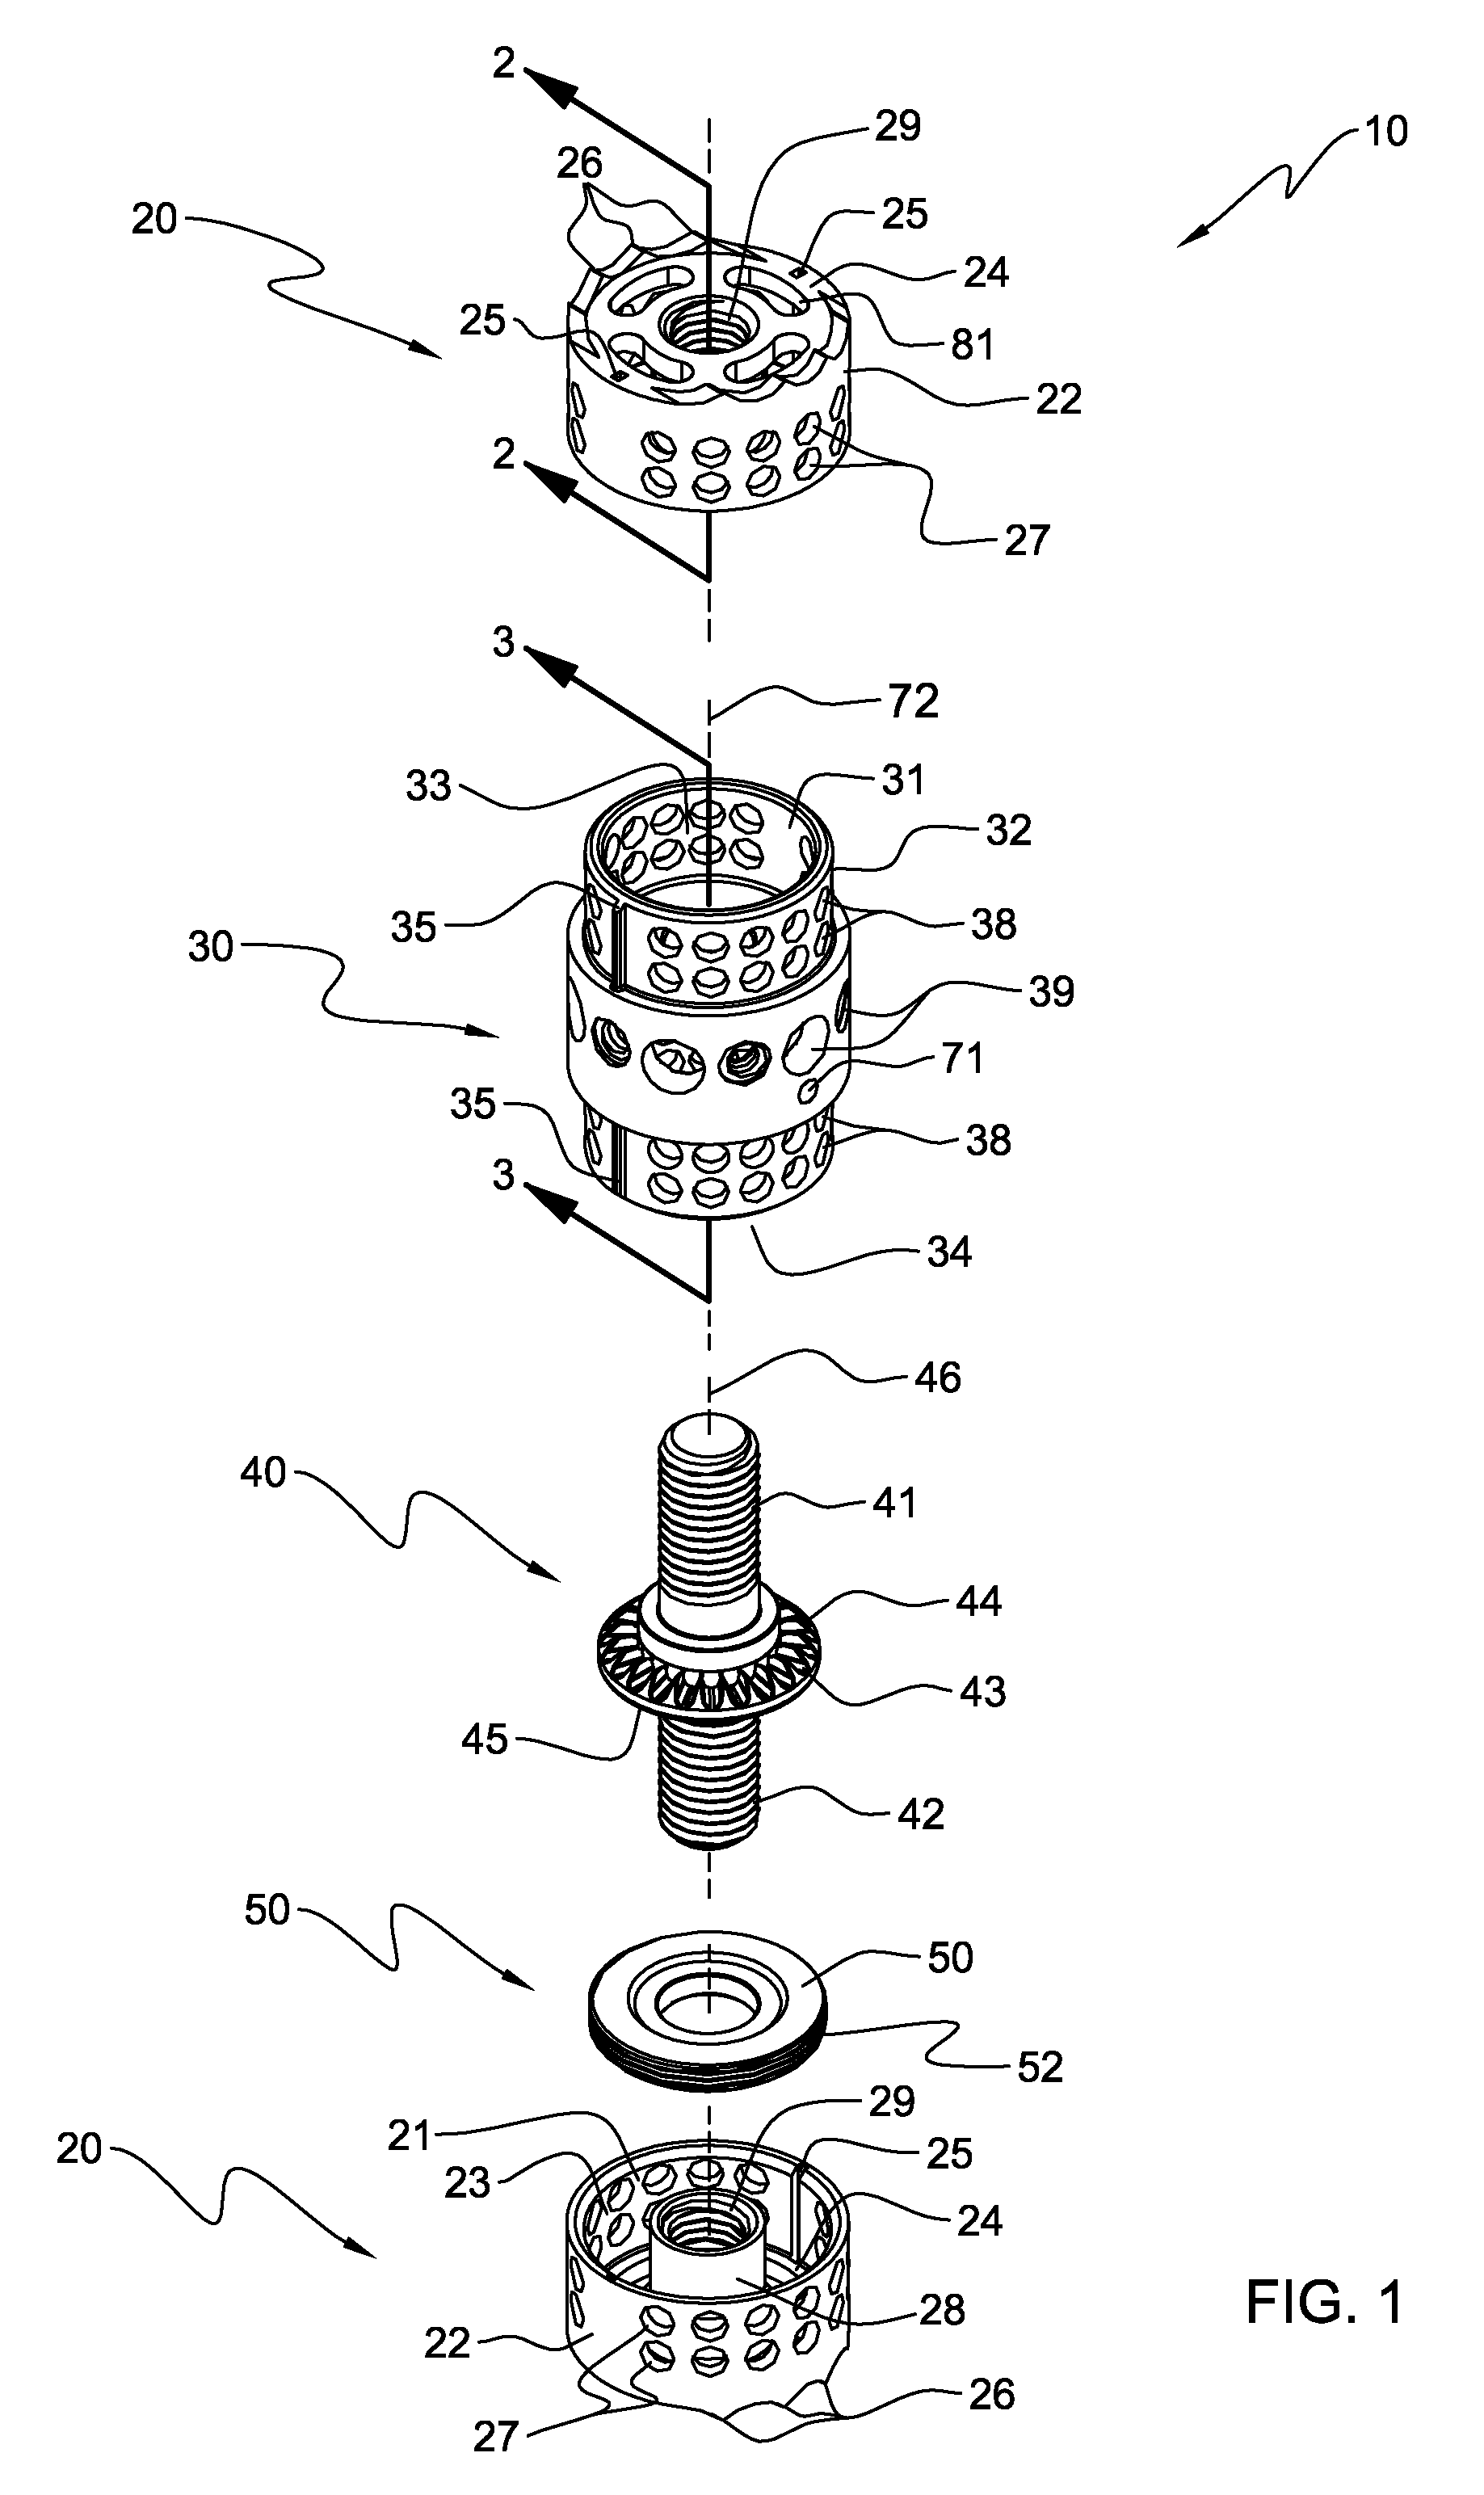 Vertebral body replacement device and method for use to maintain a space between two vertebral bodies within a spine